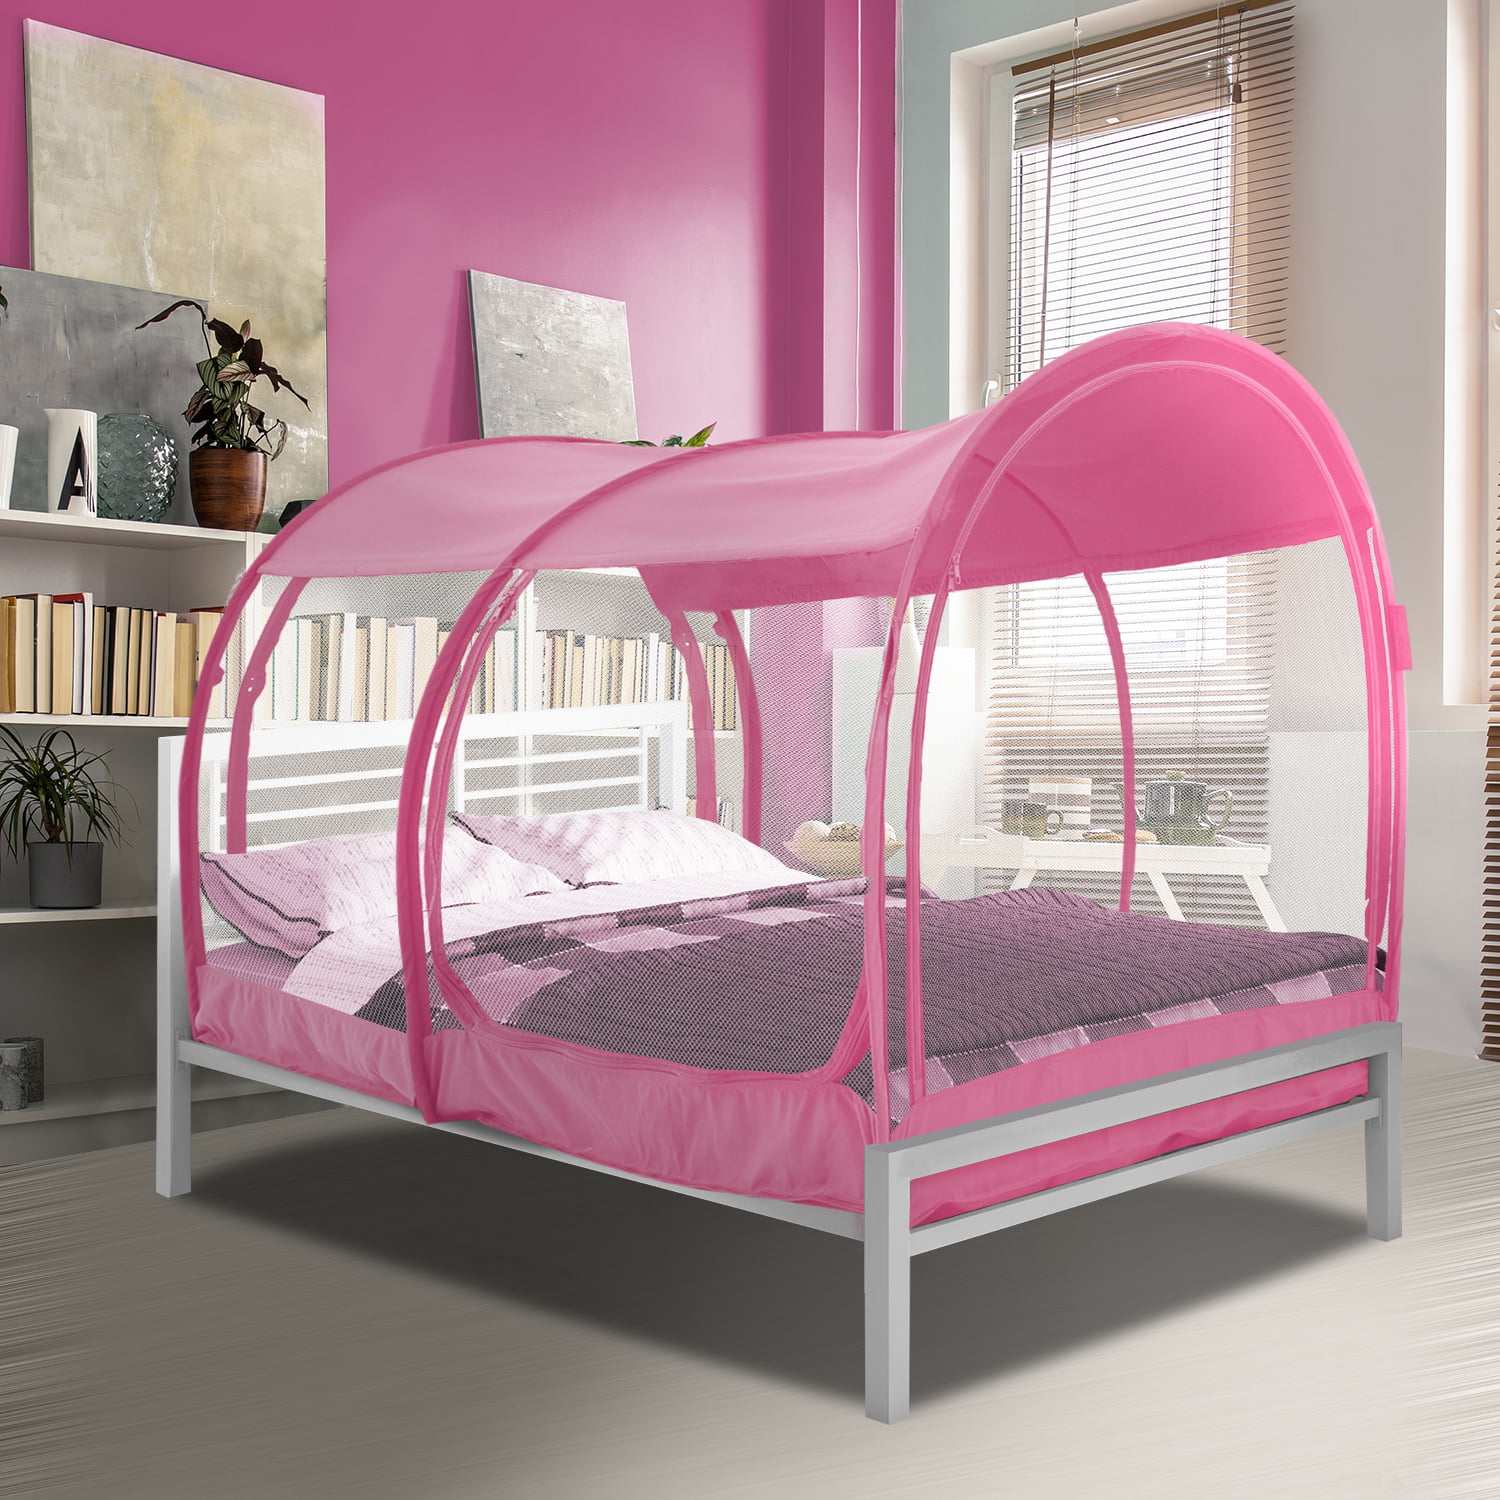 Bed Tent Mosquito Net Privacy Space, Bed Tents For Twin Beds